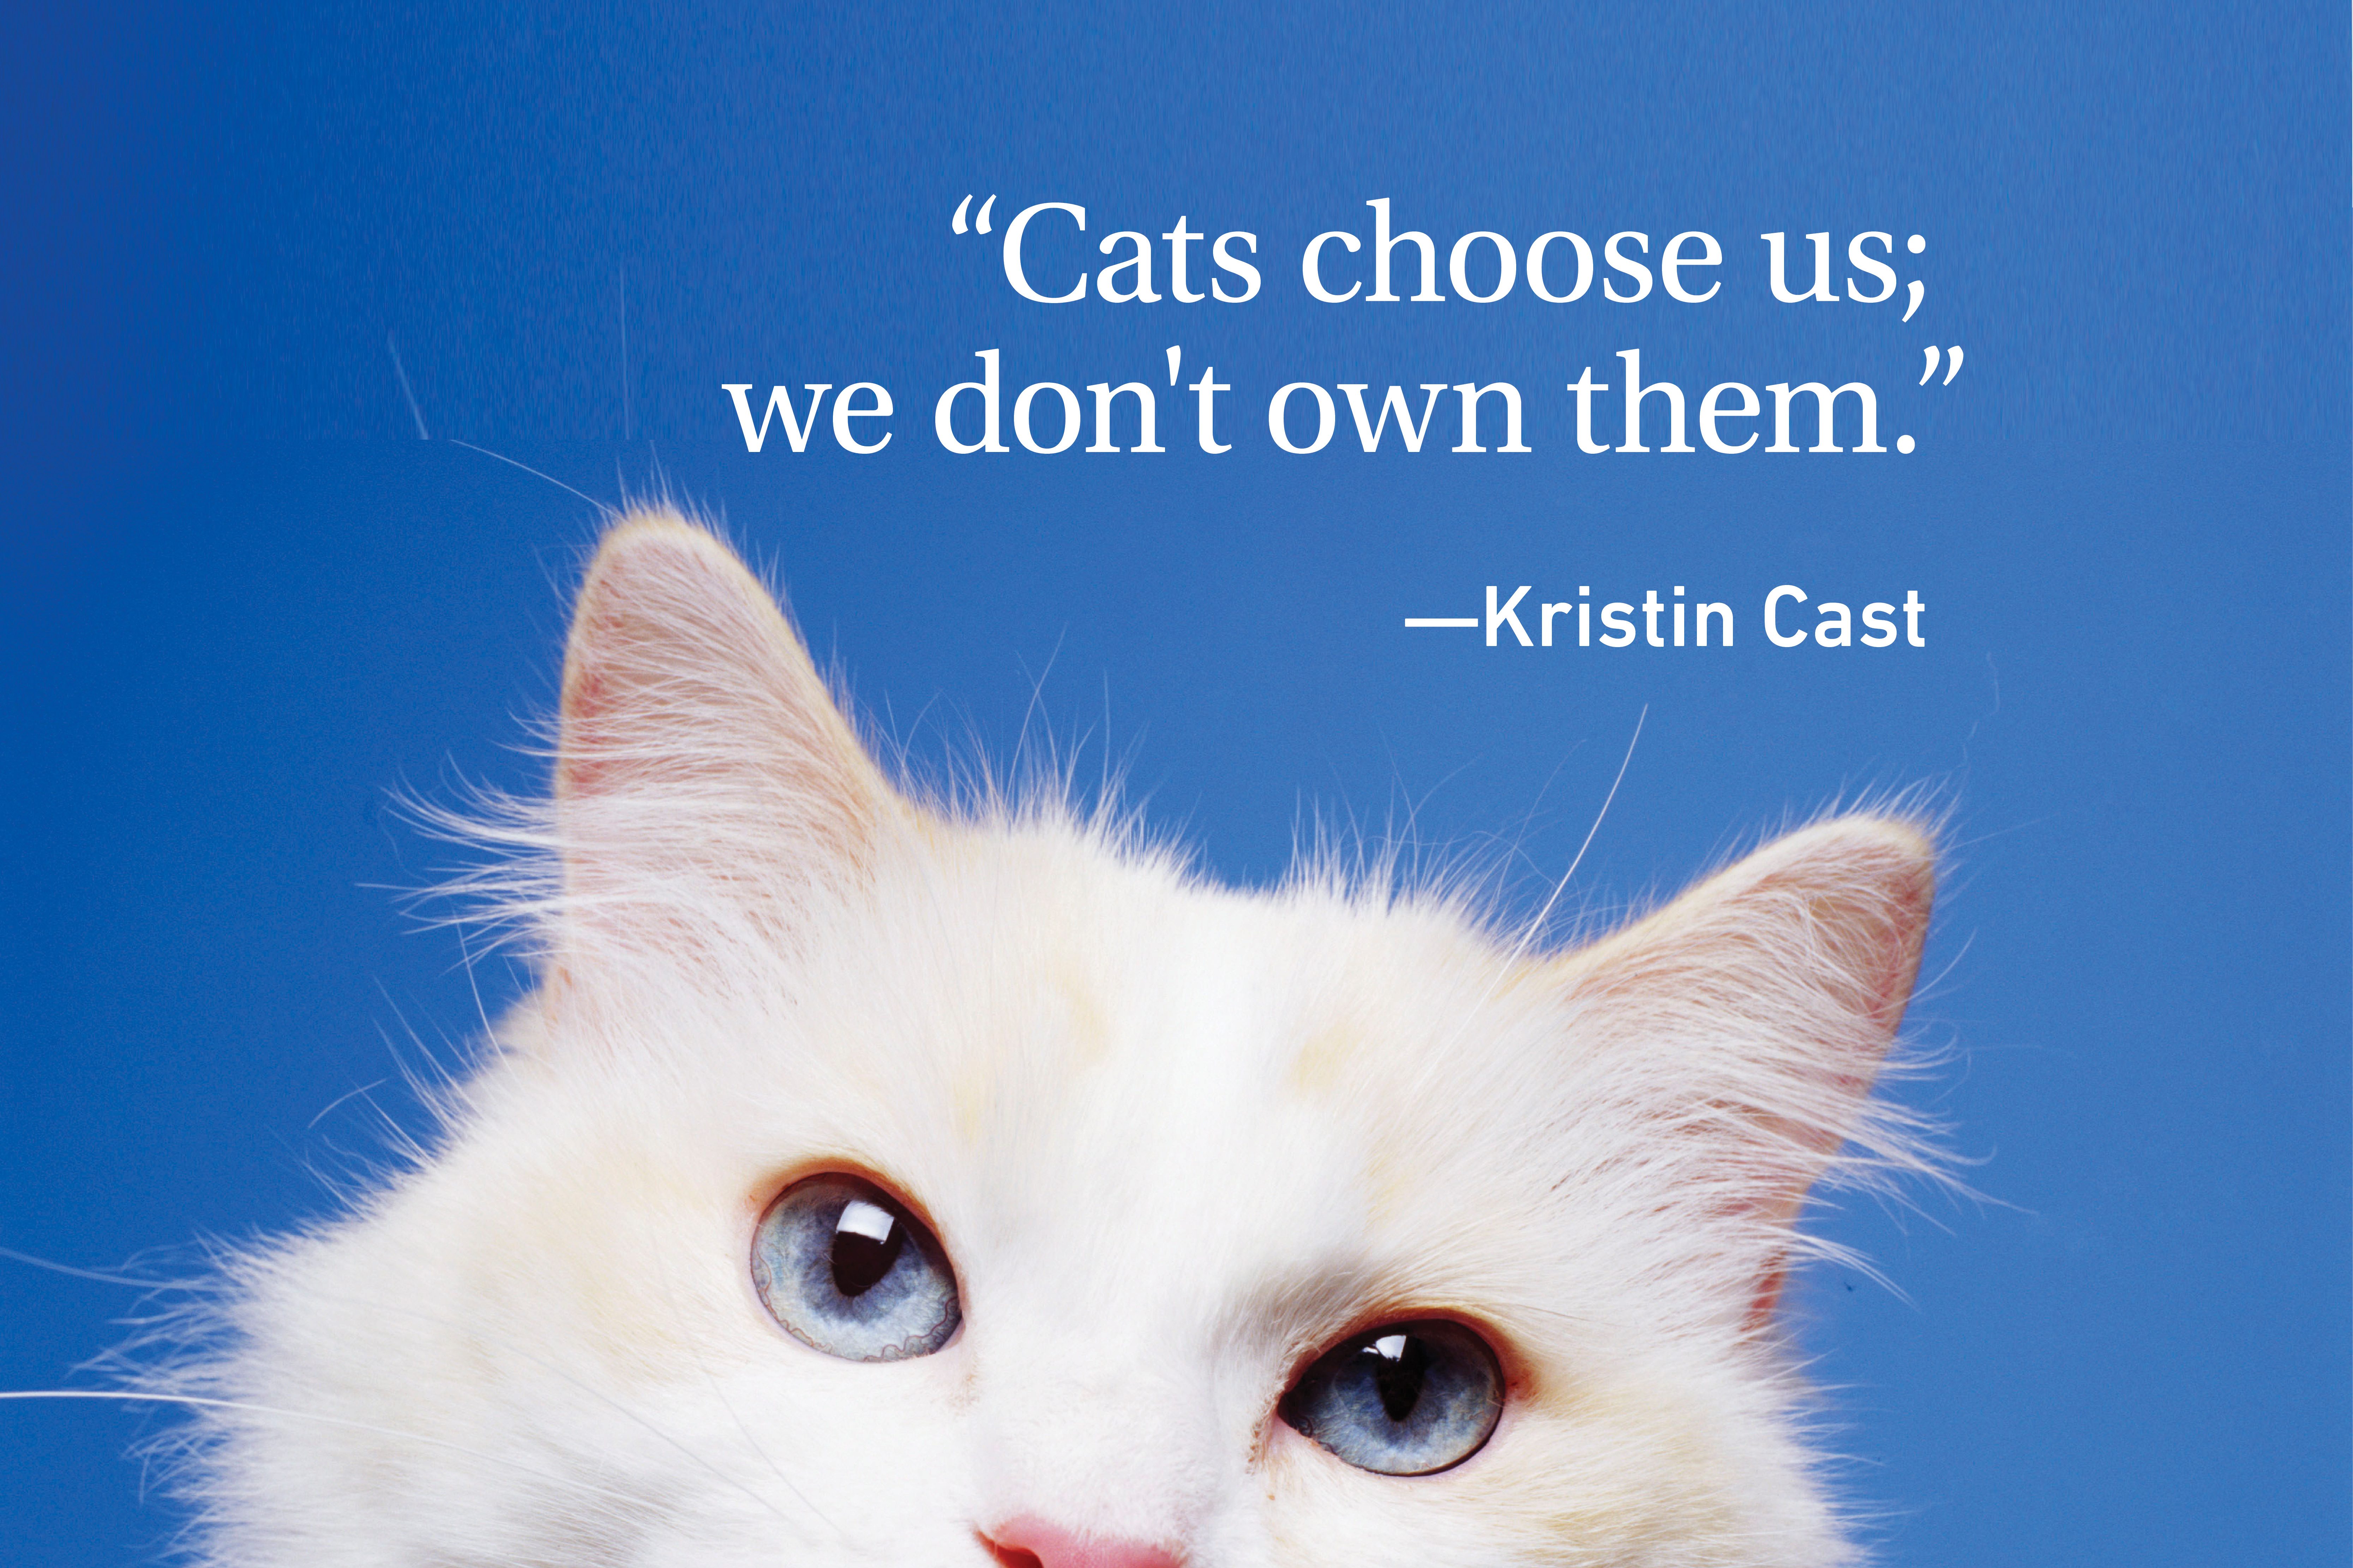 White cat on blue background with quote on cats